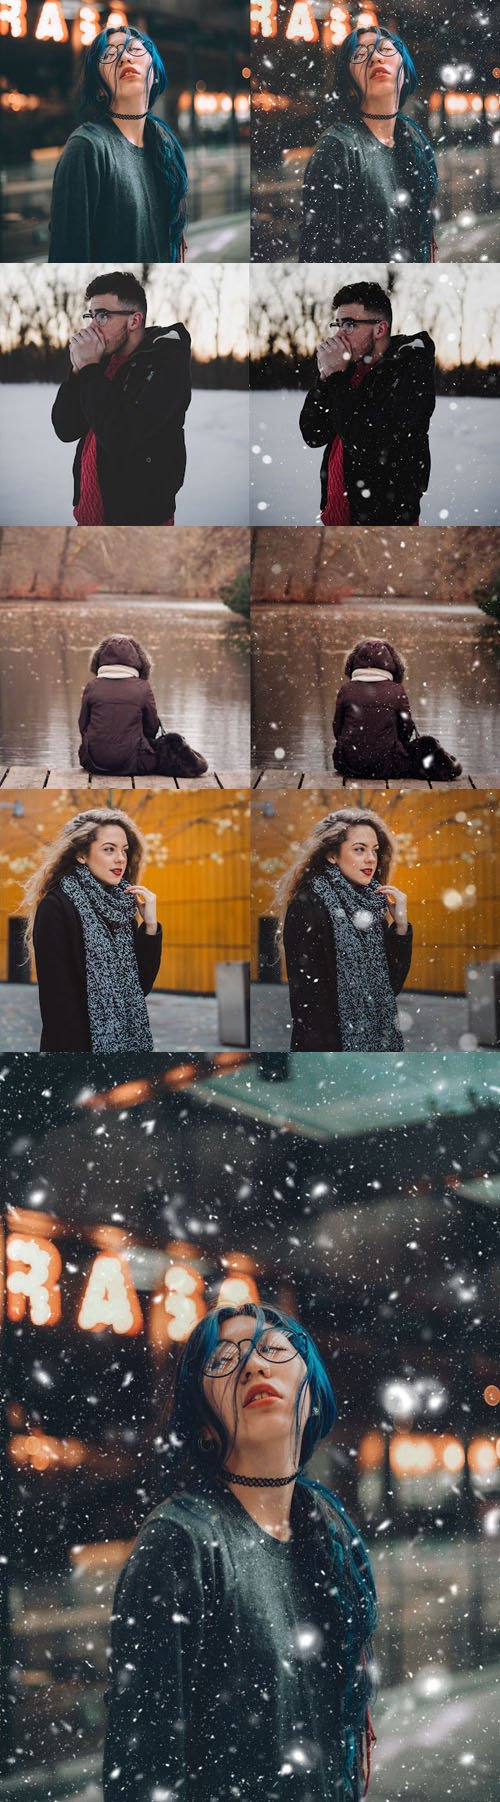 Cool Realistic Falling Snow Effect for Photoshop Vol.2 + Tutorial